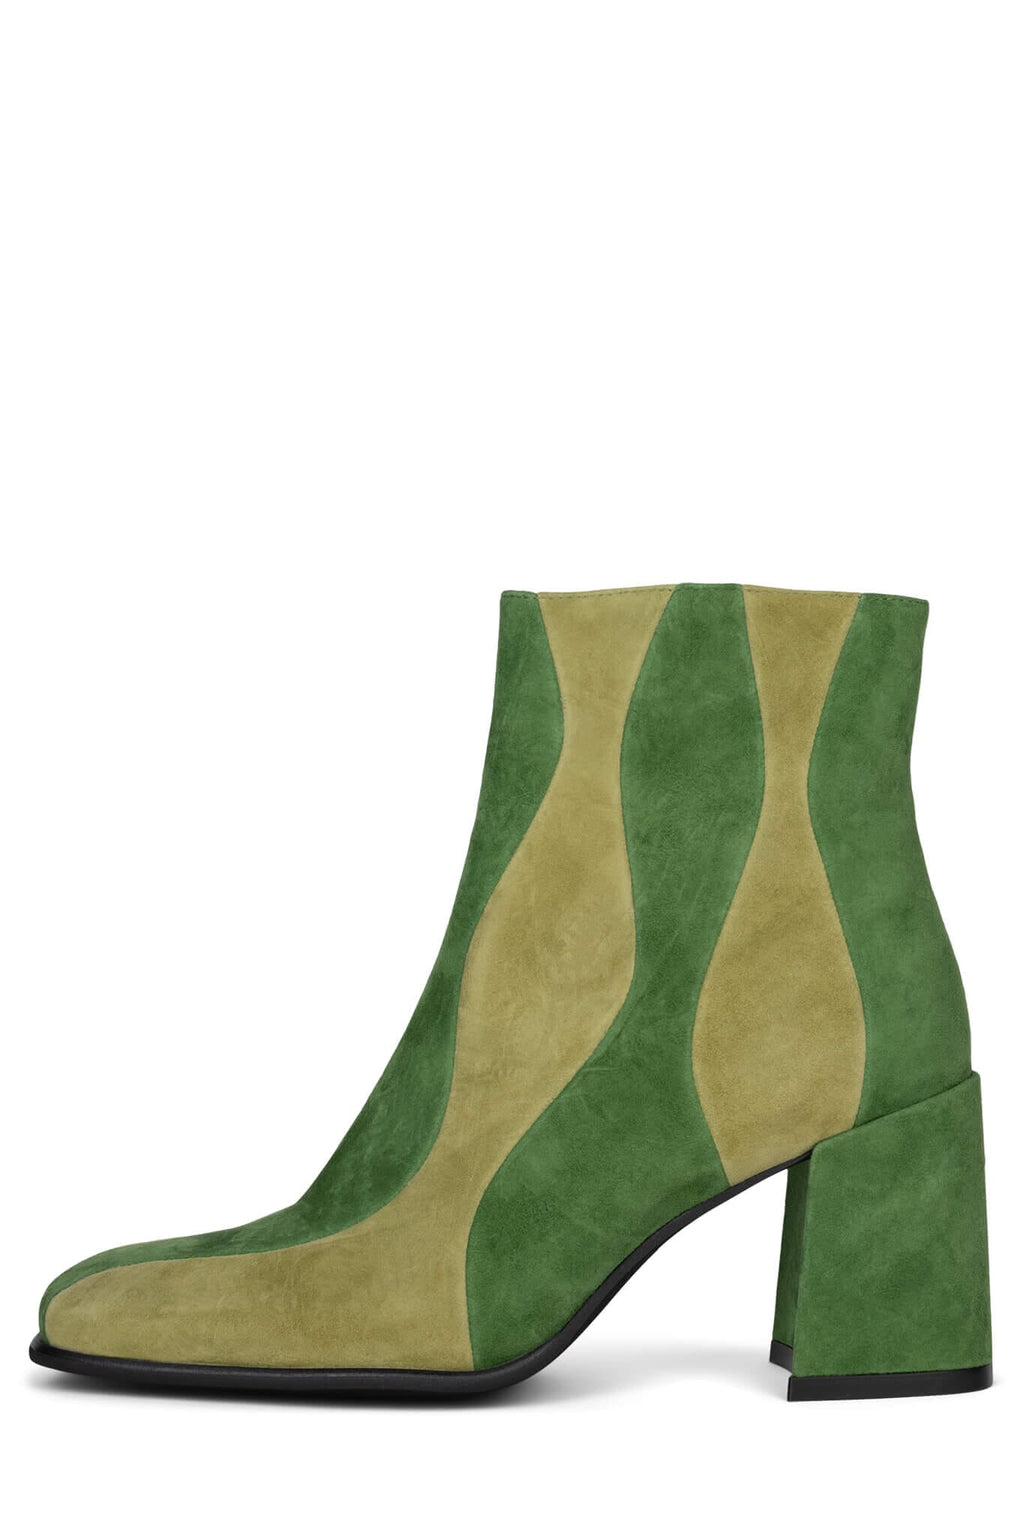 LAVALAMP Heeled Bootie STRATEGY Green Suede Combo 6 